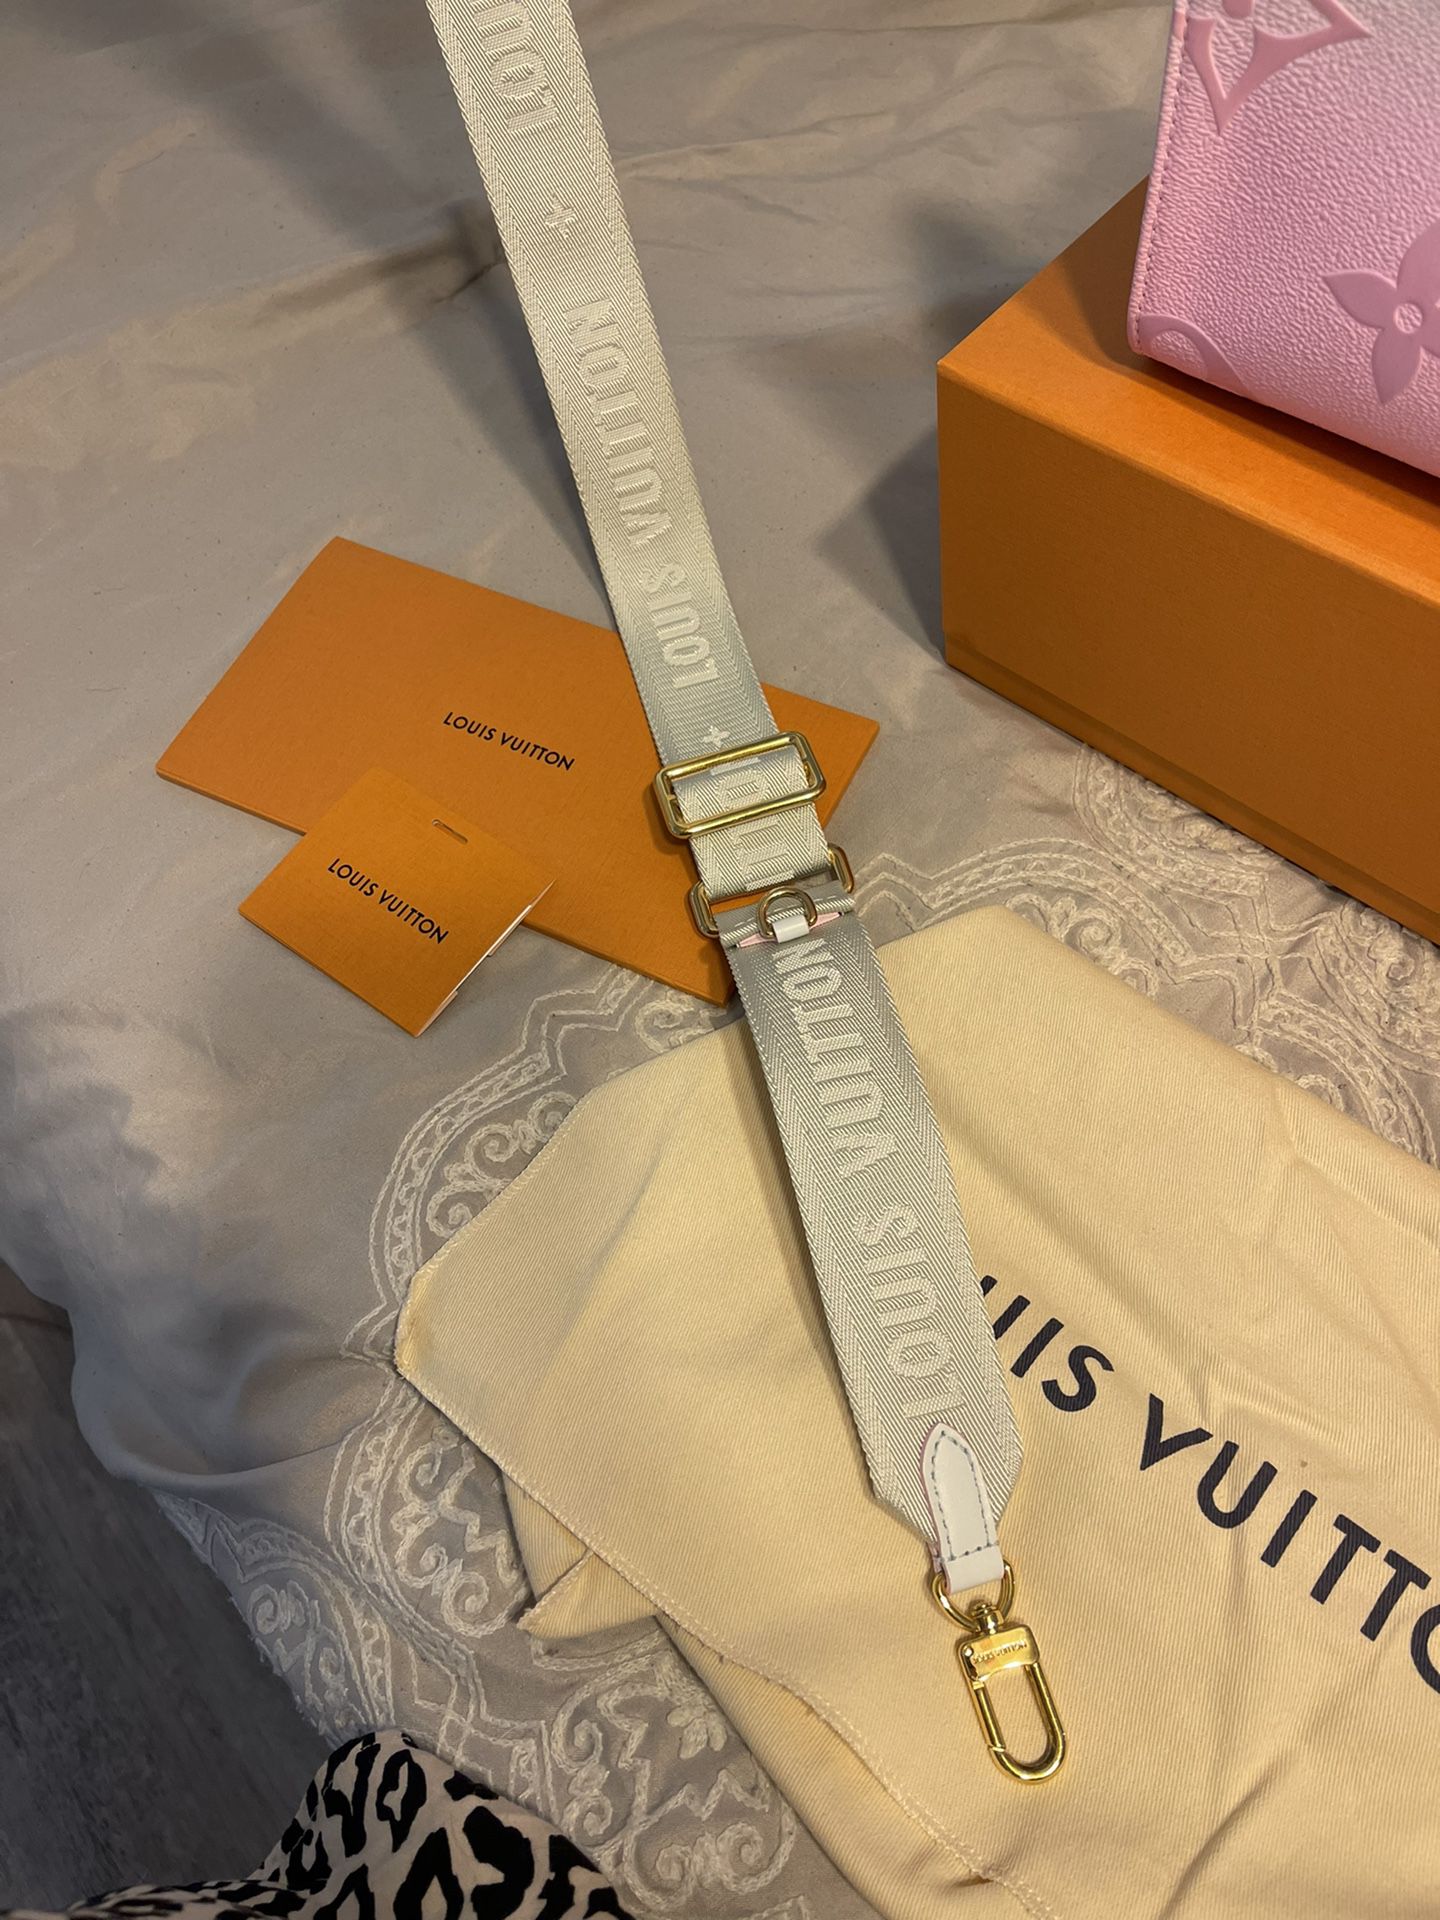 Louis Vuitton Graceful PM for Sale in Oxnard, CA - OfferUp